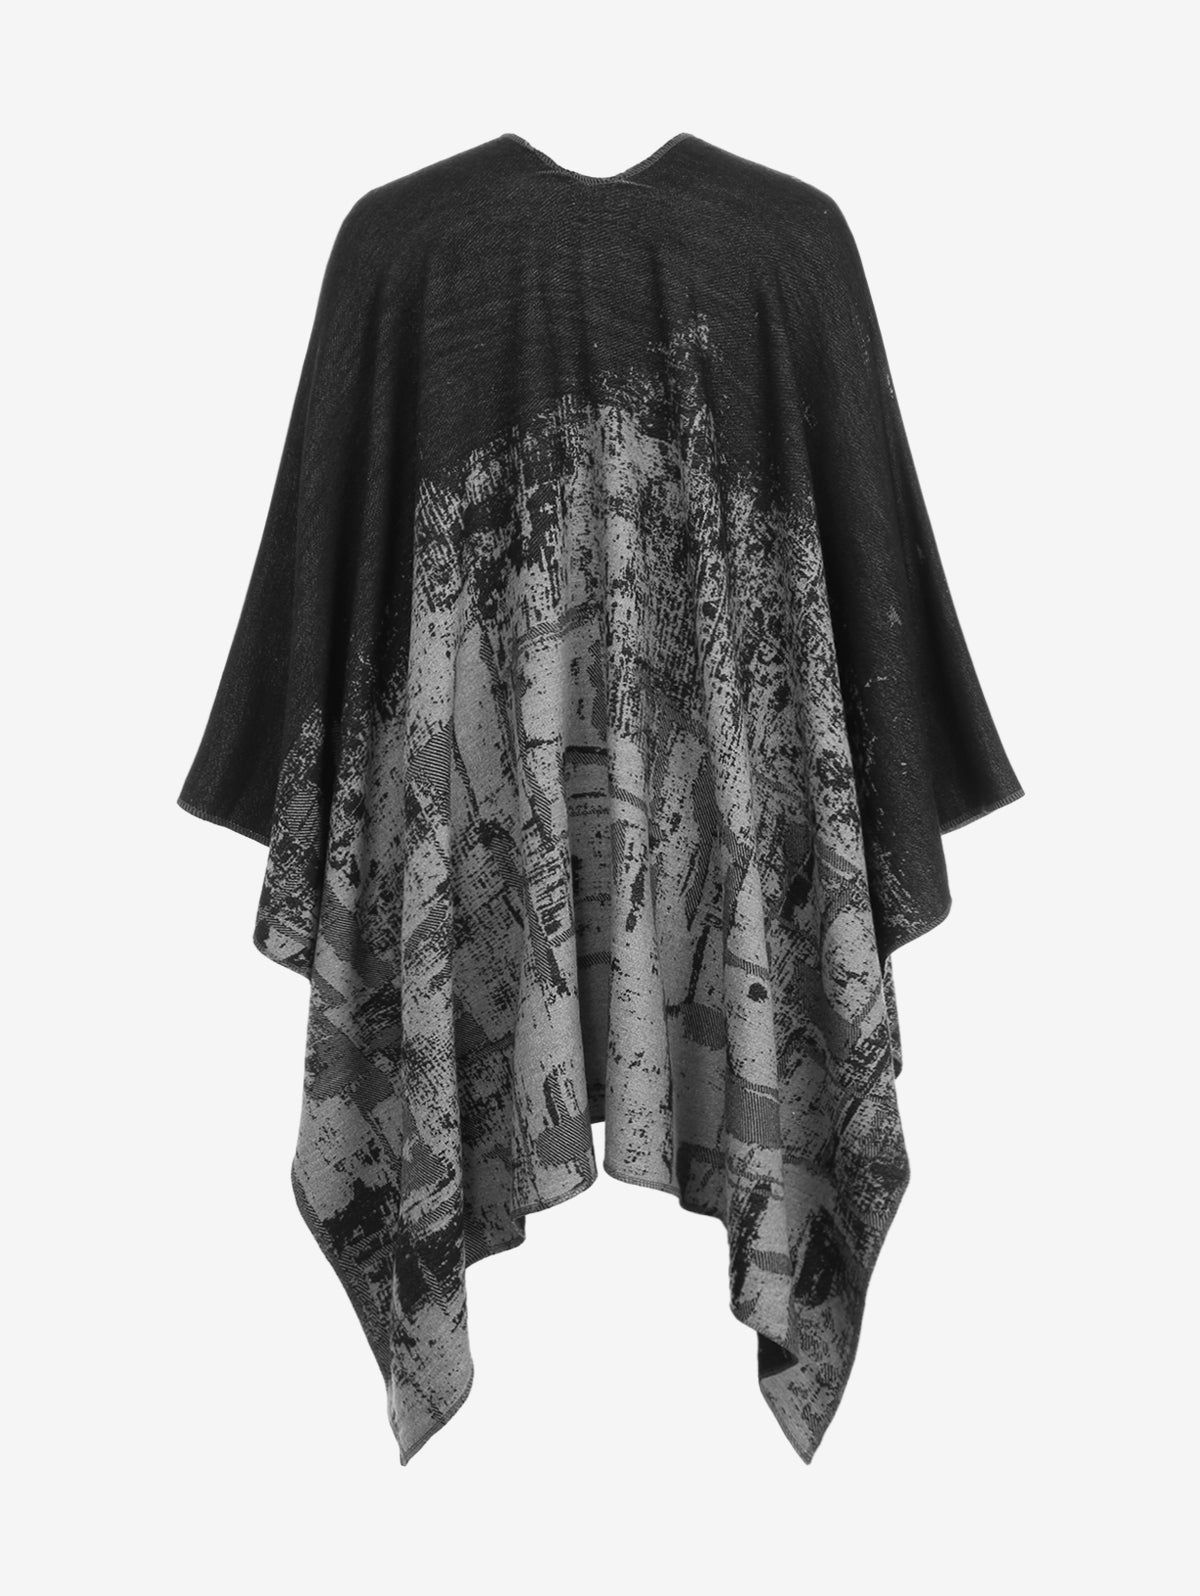 Gothic Vintage Ruined Distressed Plaid Floral Graphic Knit Asymmetric Cape